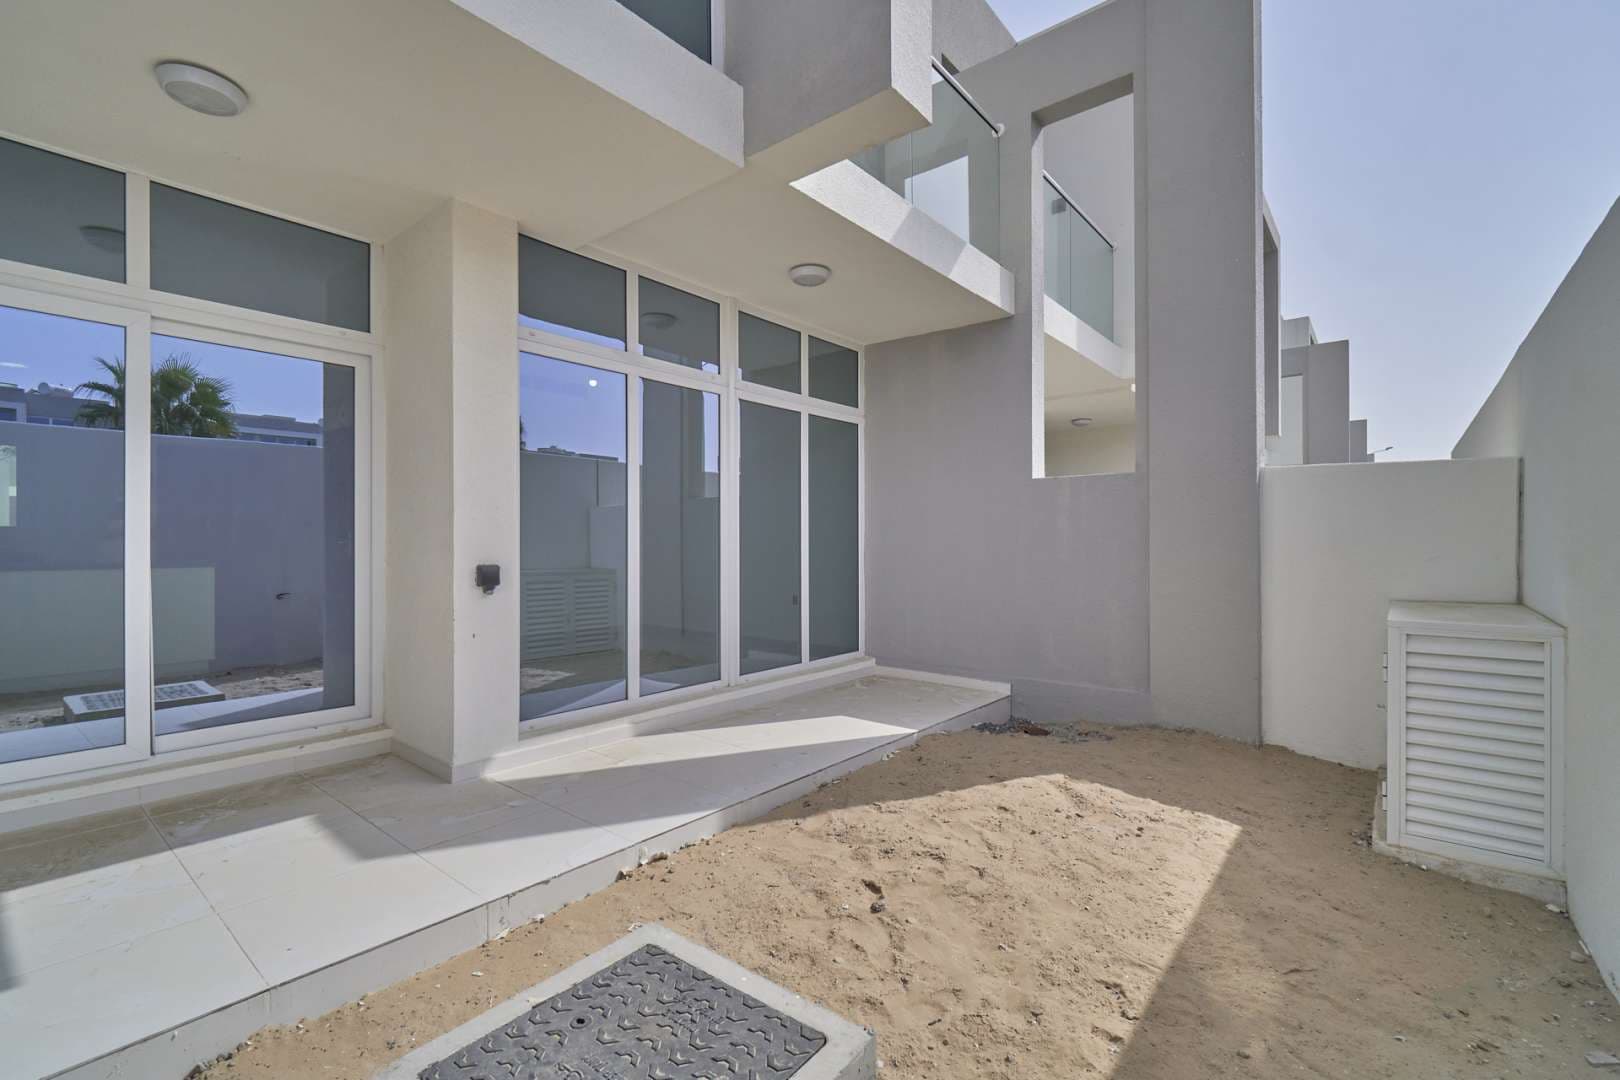 3 Bedroom Townhouse For Rent Mimosa Lp07923 1bf88735beb95200.jpg